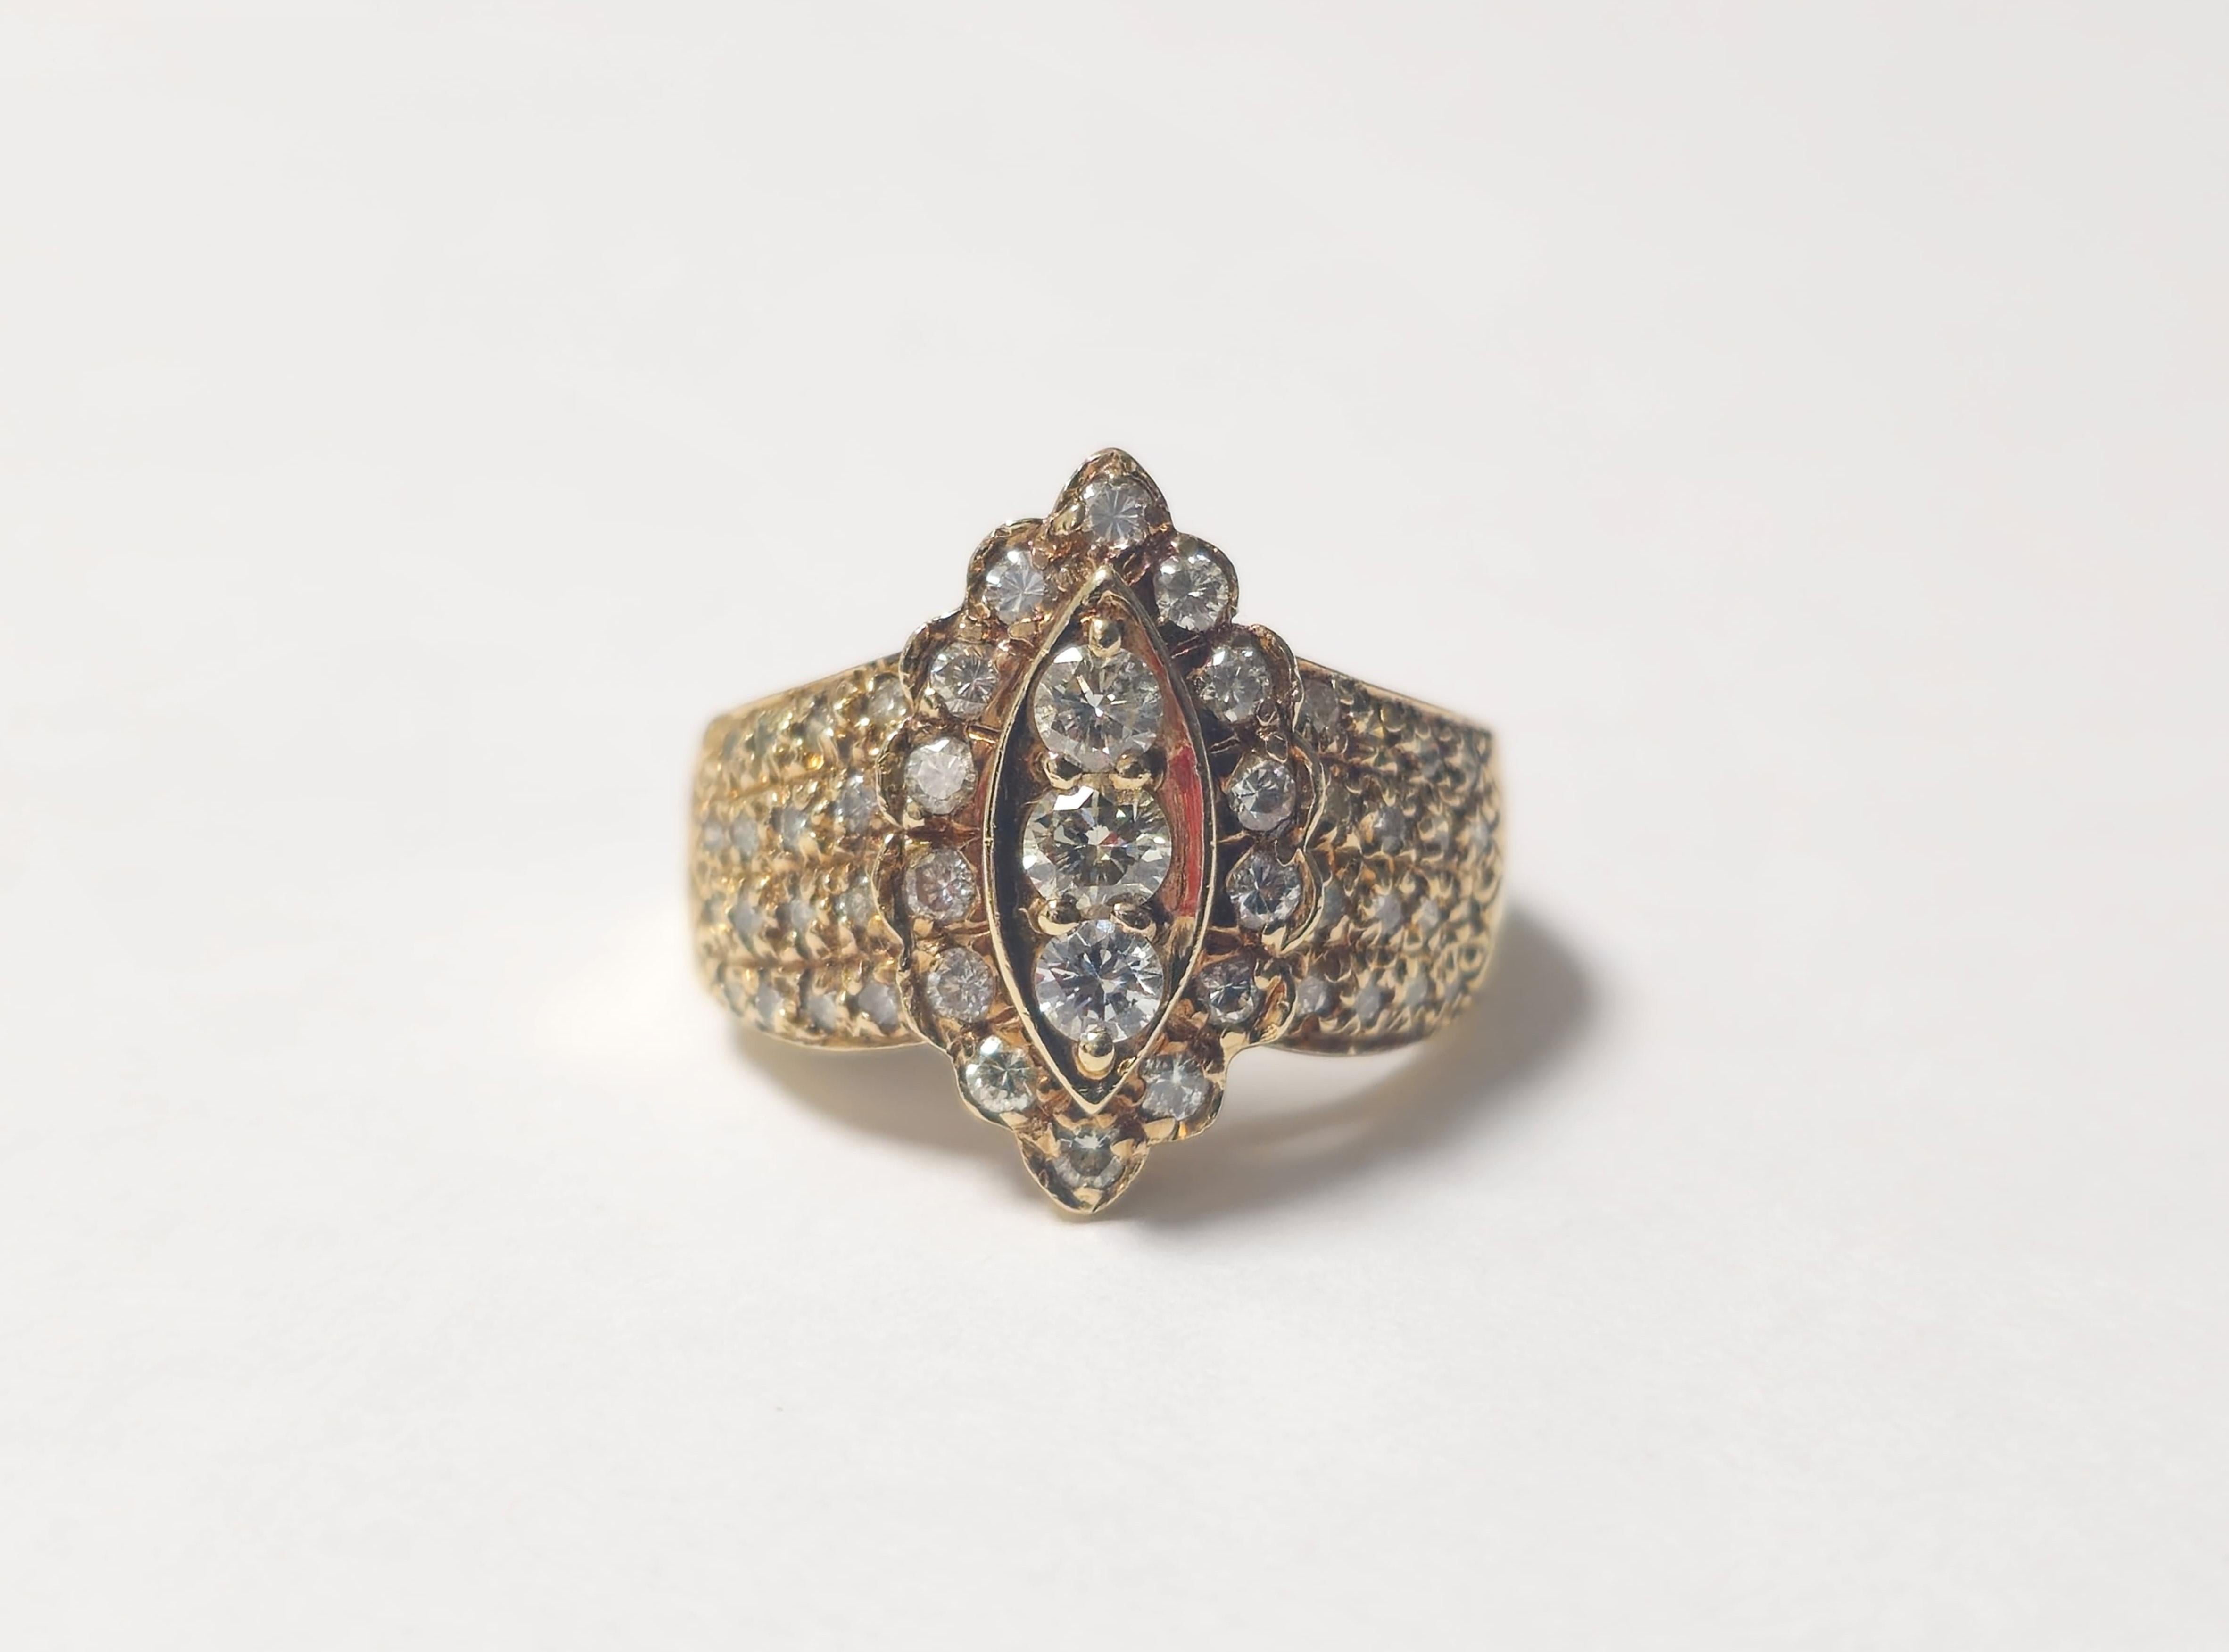 Crafted from 14k gold, this ring weighs 6 grams and is sized at US 6.75, showcasing a total of 2.3 carats of diamonds with SI1-SI2 clarity and G-H color. The design highlights a captivating arrangement of diamonds, offering sparkle and brilliance.